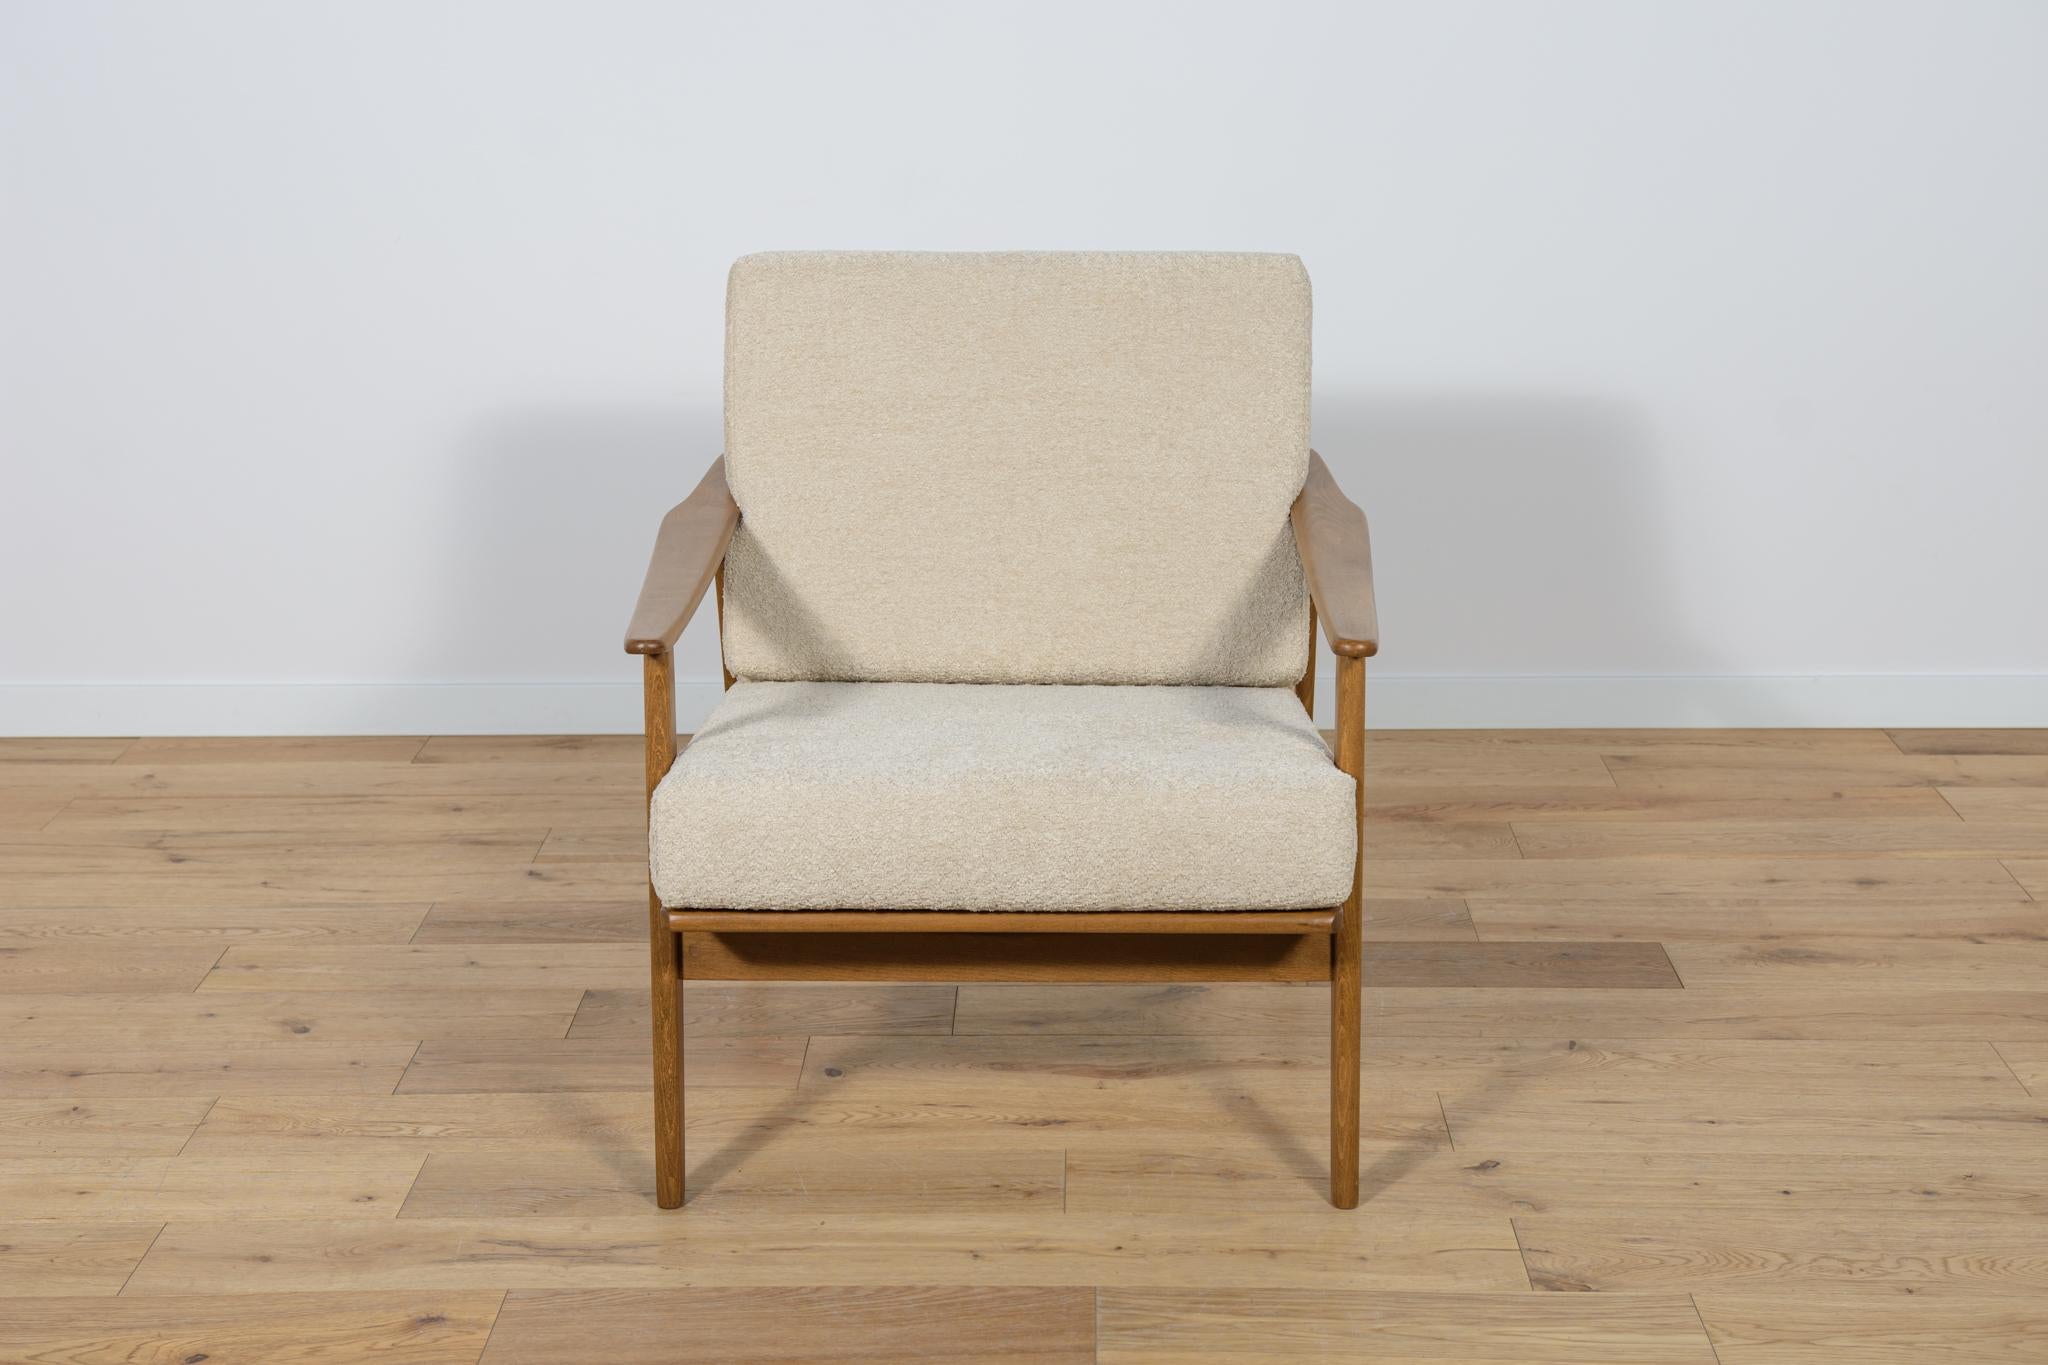 Armchair Model 5825  manufactured in the 1960s in Poland. Armchair with a unique Scandinavian form. The armchairs have undergone professional carpentry and upholstery renovation. The beech wood was cleaned from the old surface, painted with an